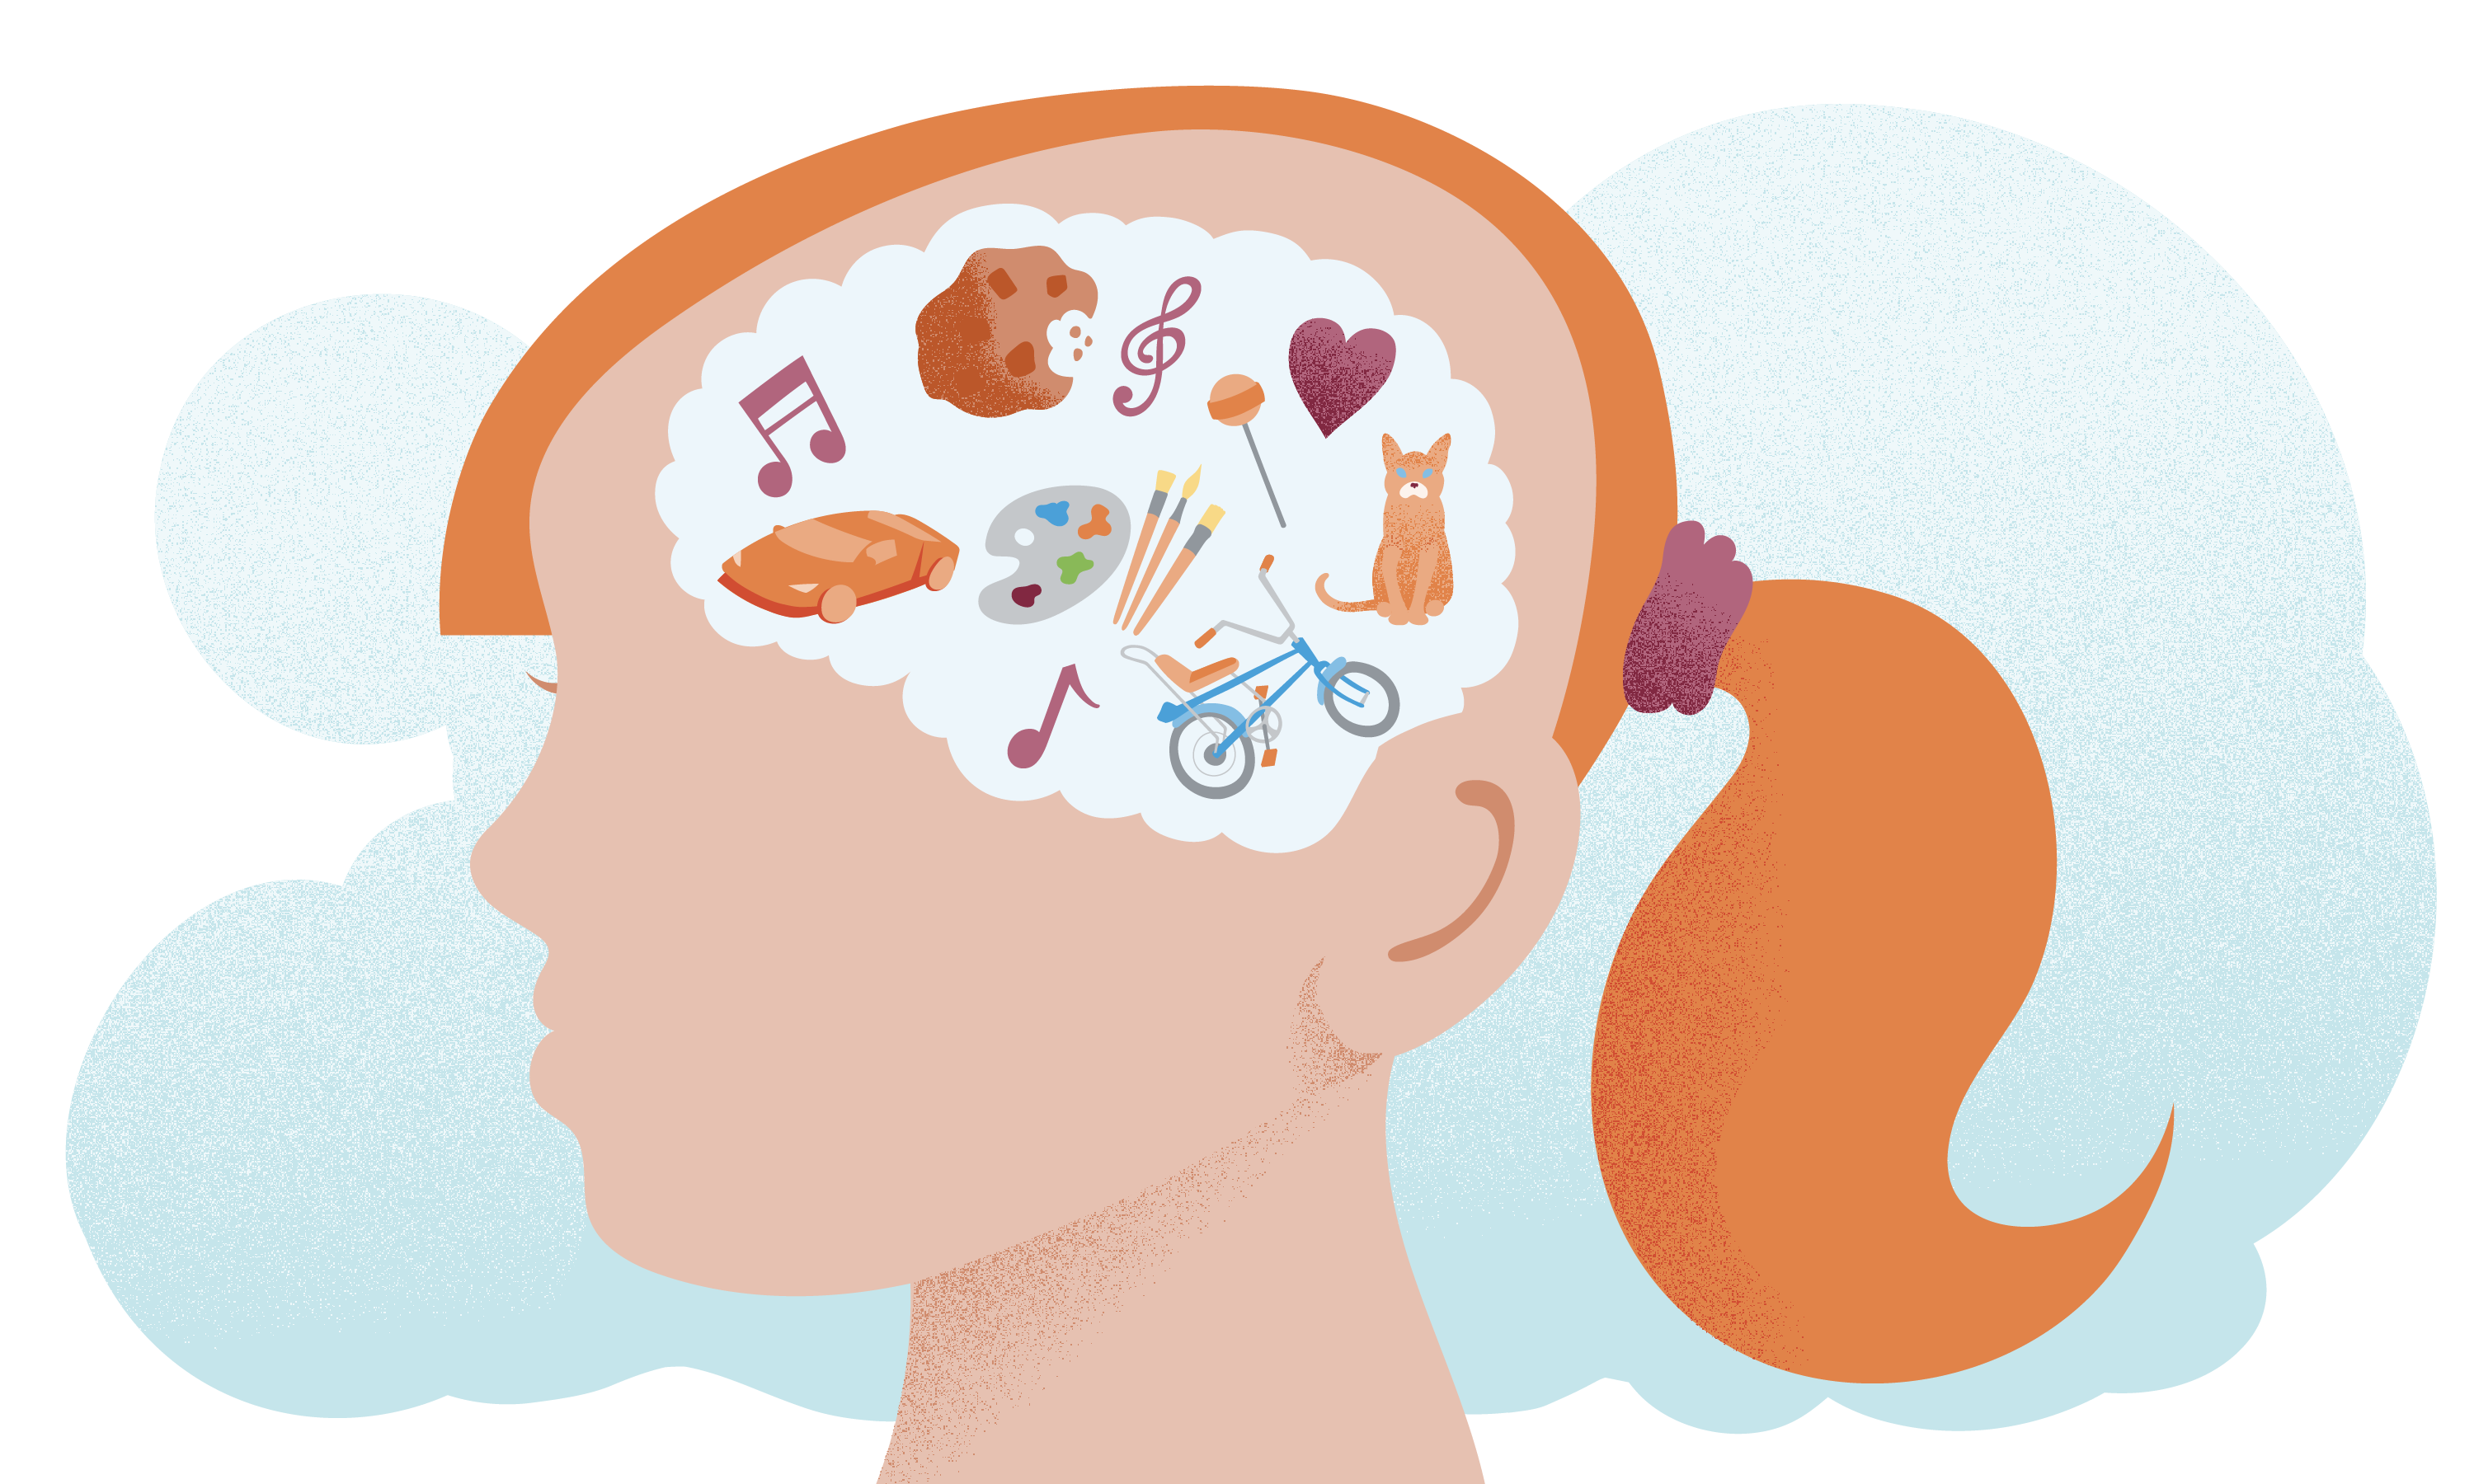 representation of various things children learn, such as art, music, and exercise, within brain of a child